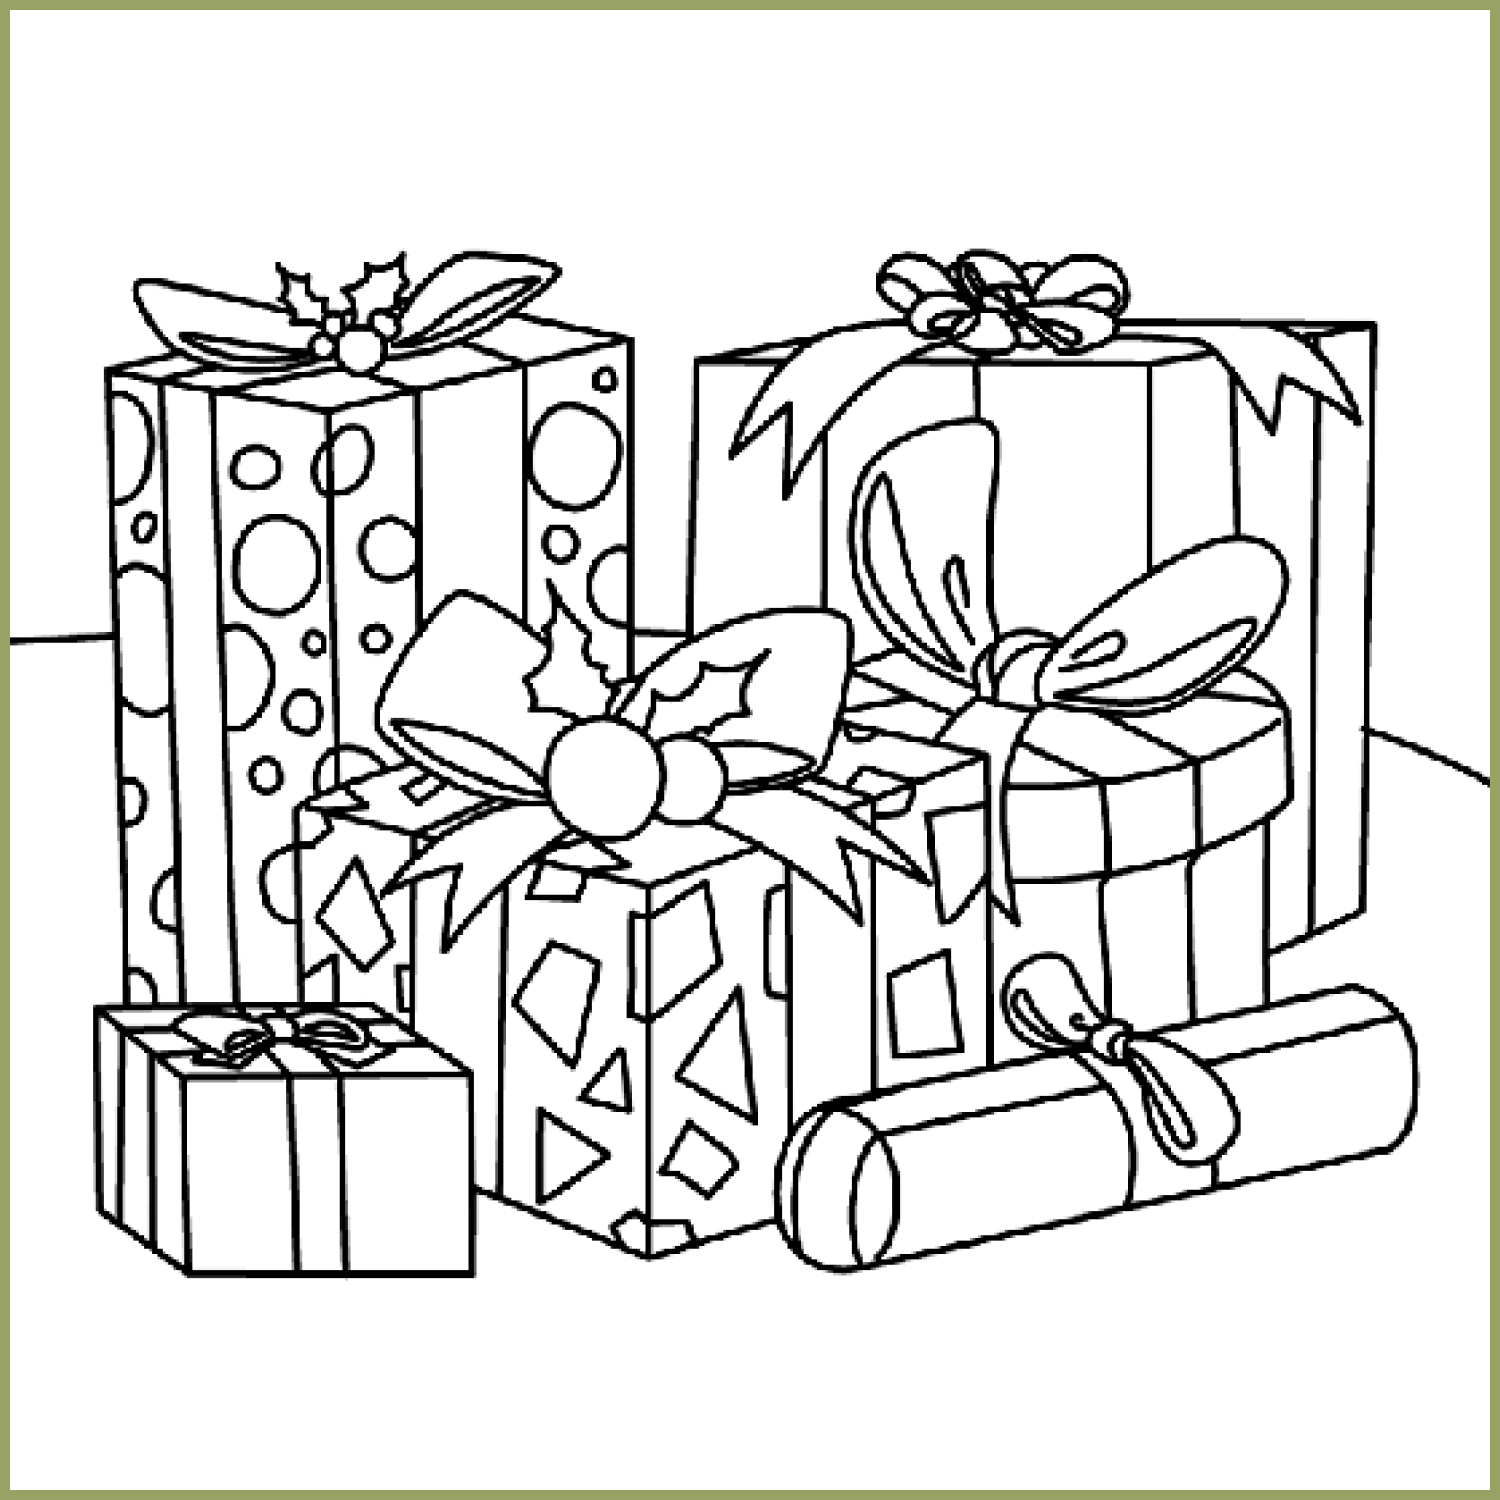 A gift of giving coloring page cover image.